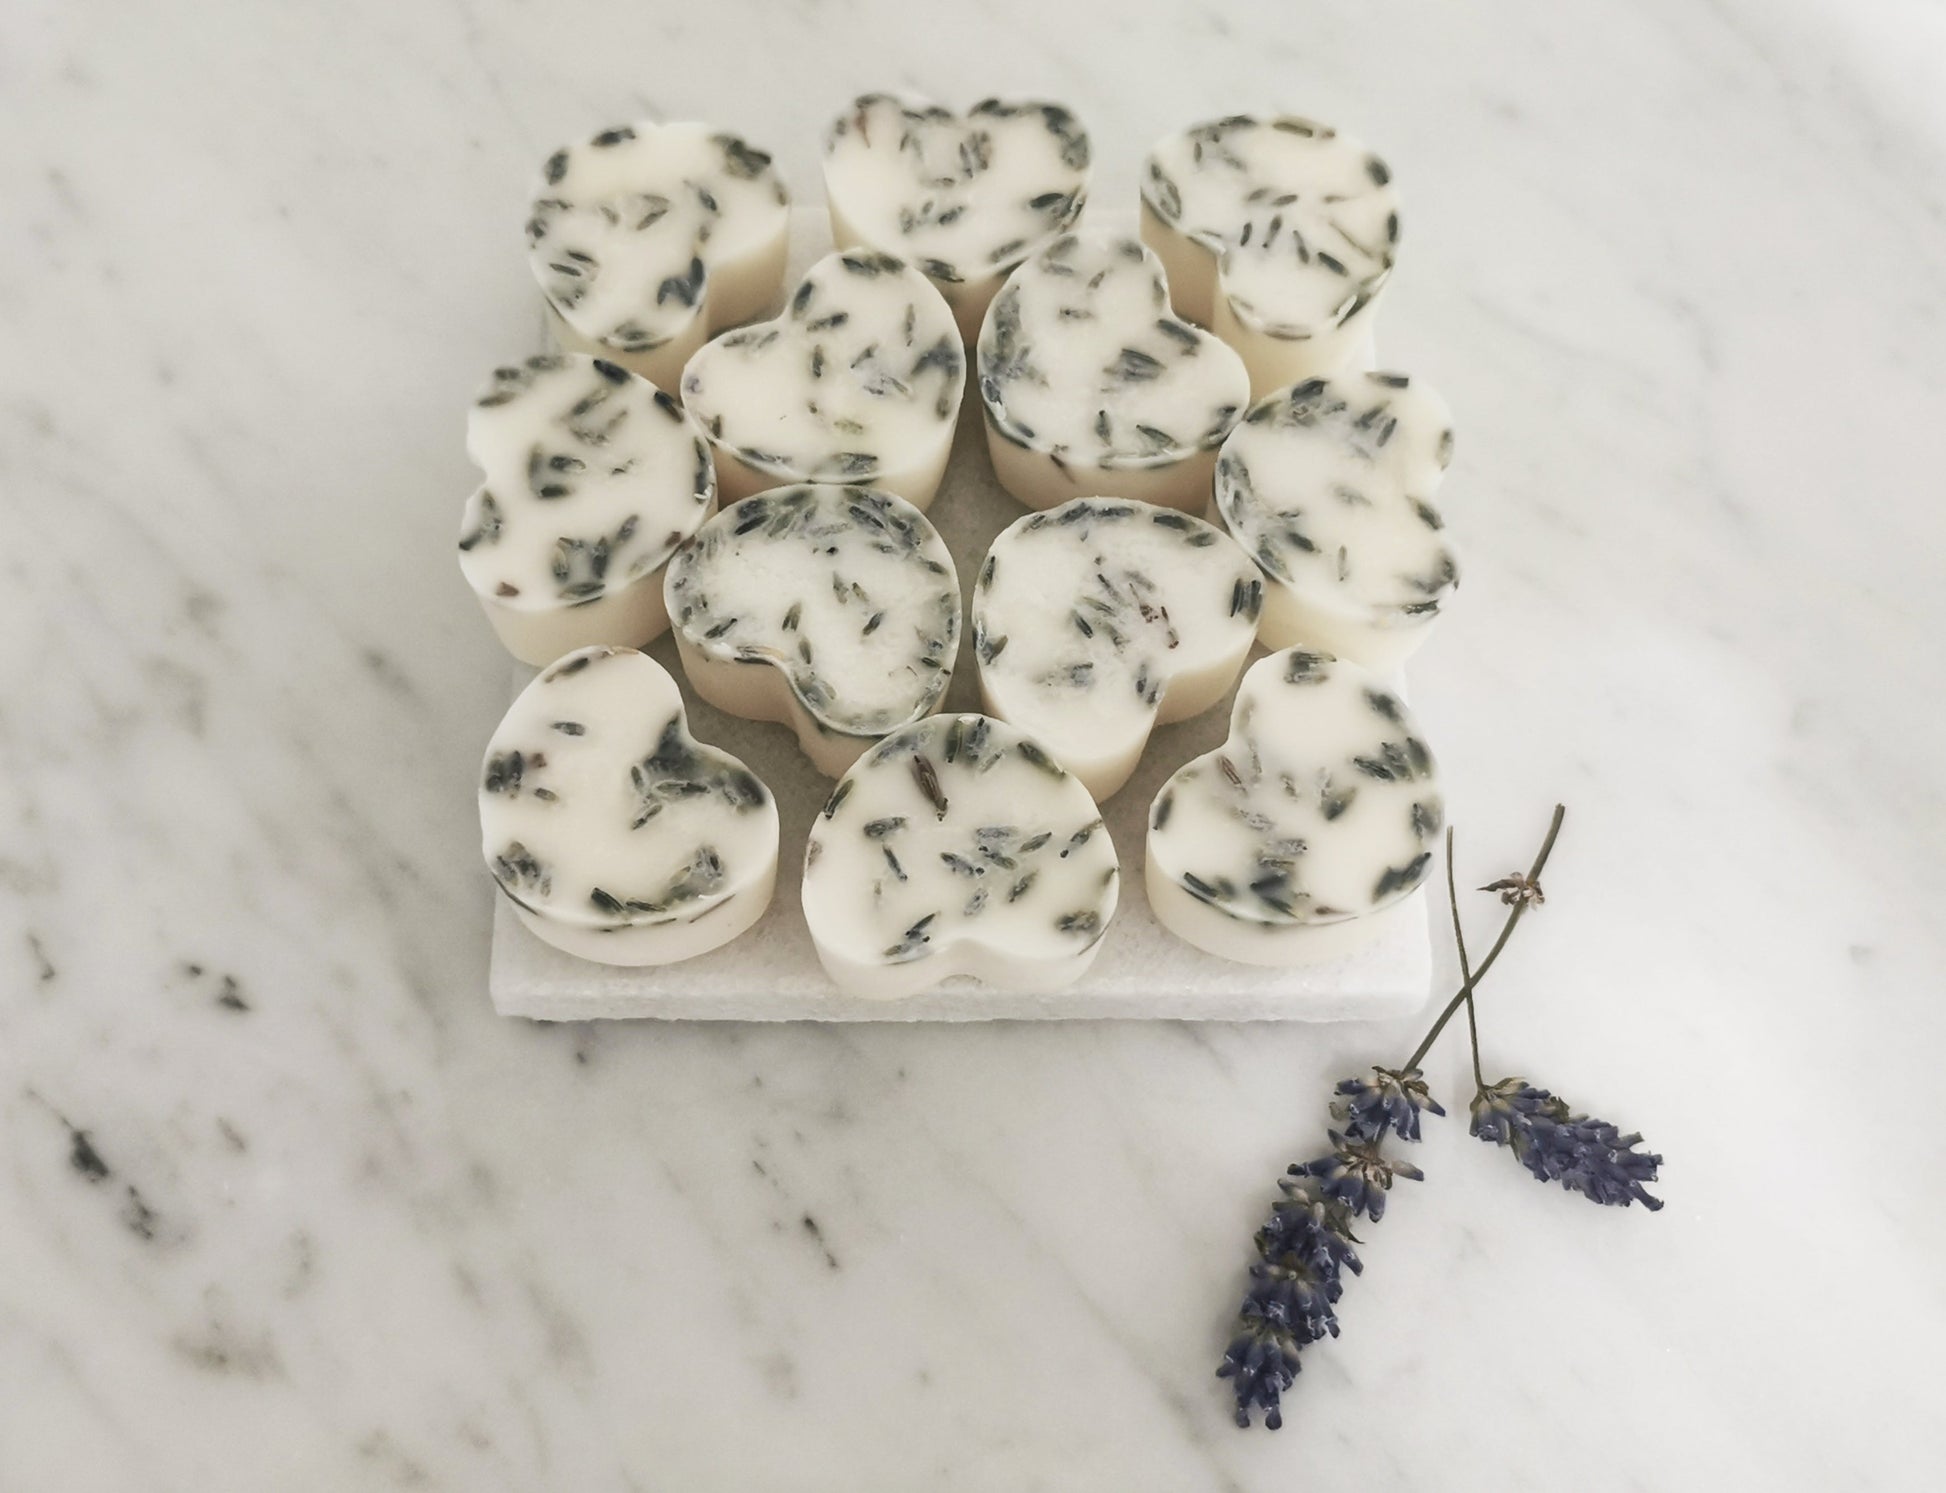 Lavender & Ylang Ylang Aromatherapy Naturally Scented Wax Melts with Lavender petals-1